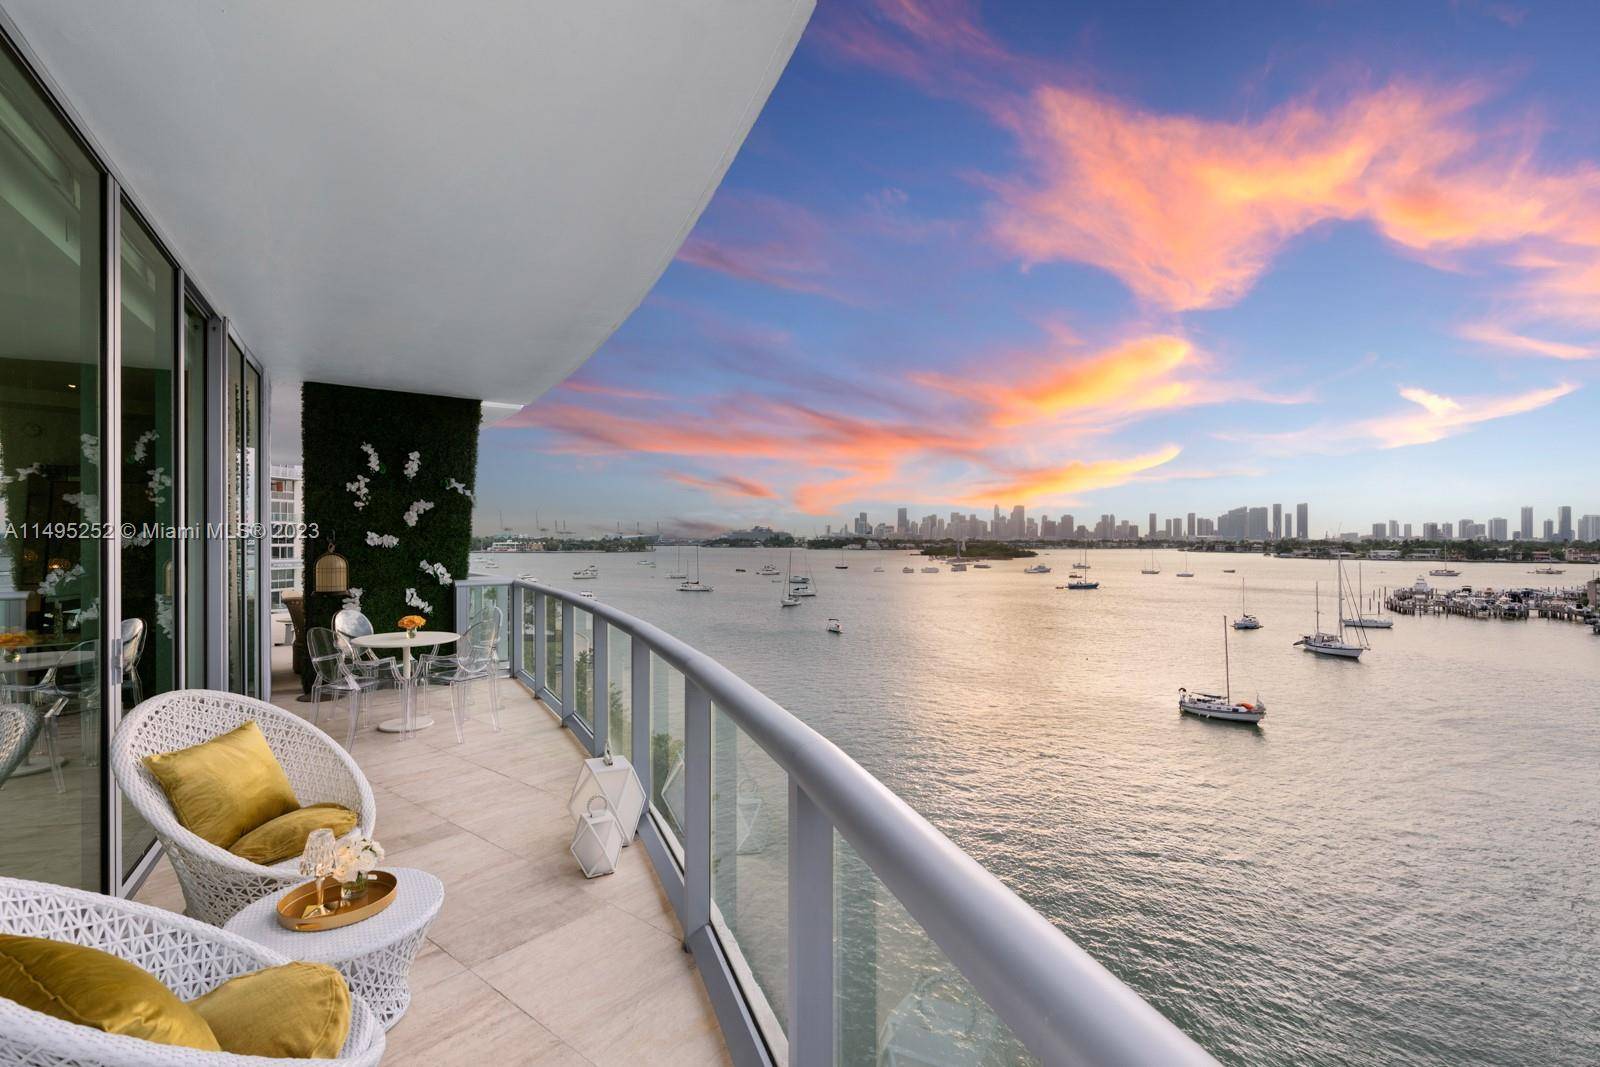 Step into the exquisite Penthouse 1 and be swept away by 360 degree awe inspiring bay dazzling Skyline views.